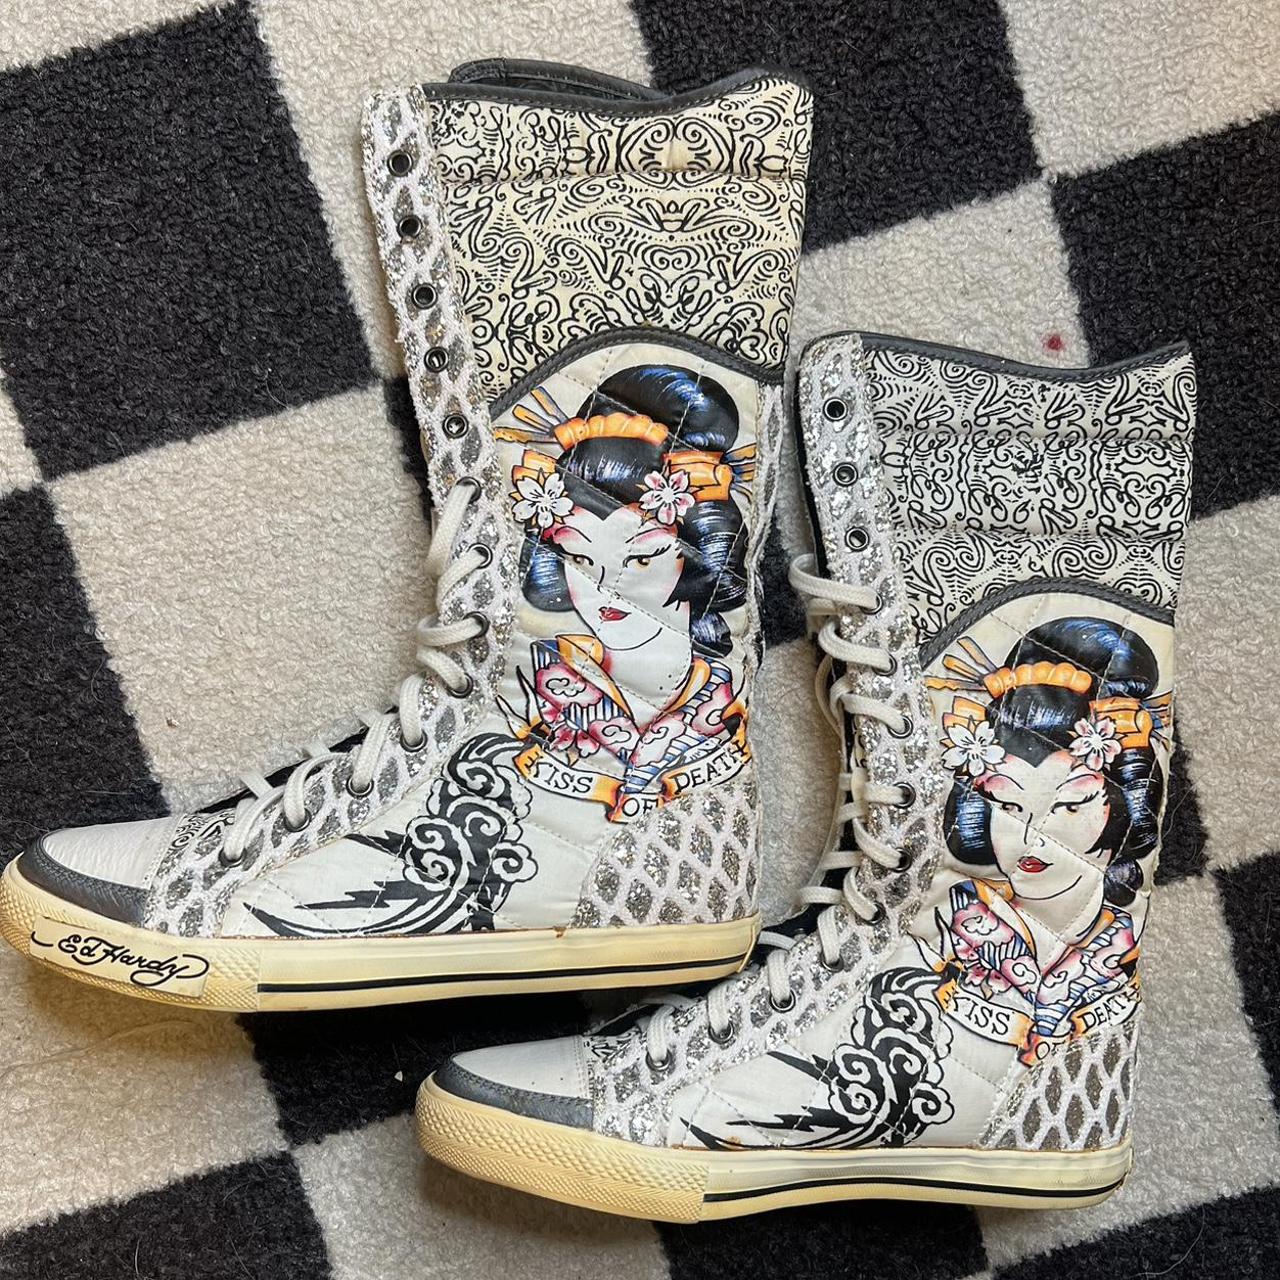 Y2K Ed Hardy lace up boots super sick boots and in... - Depop